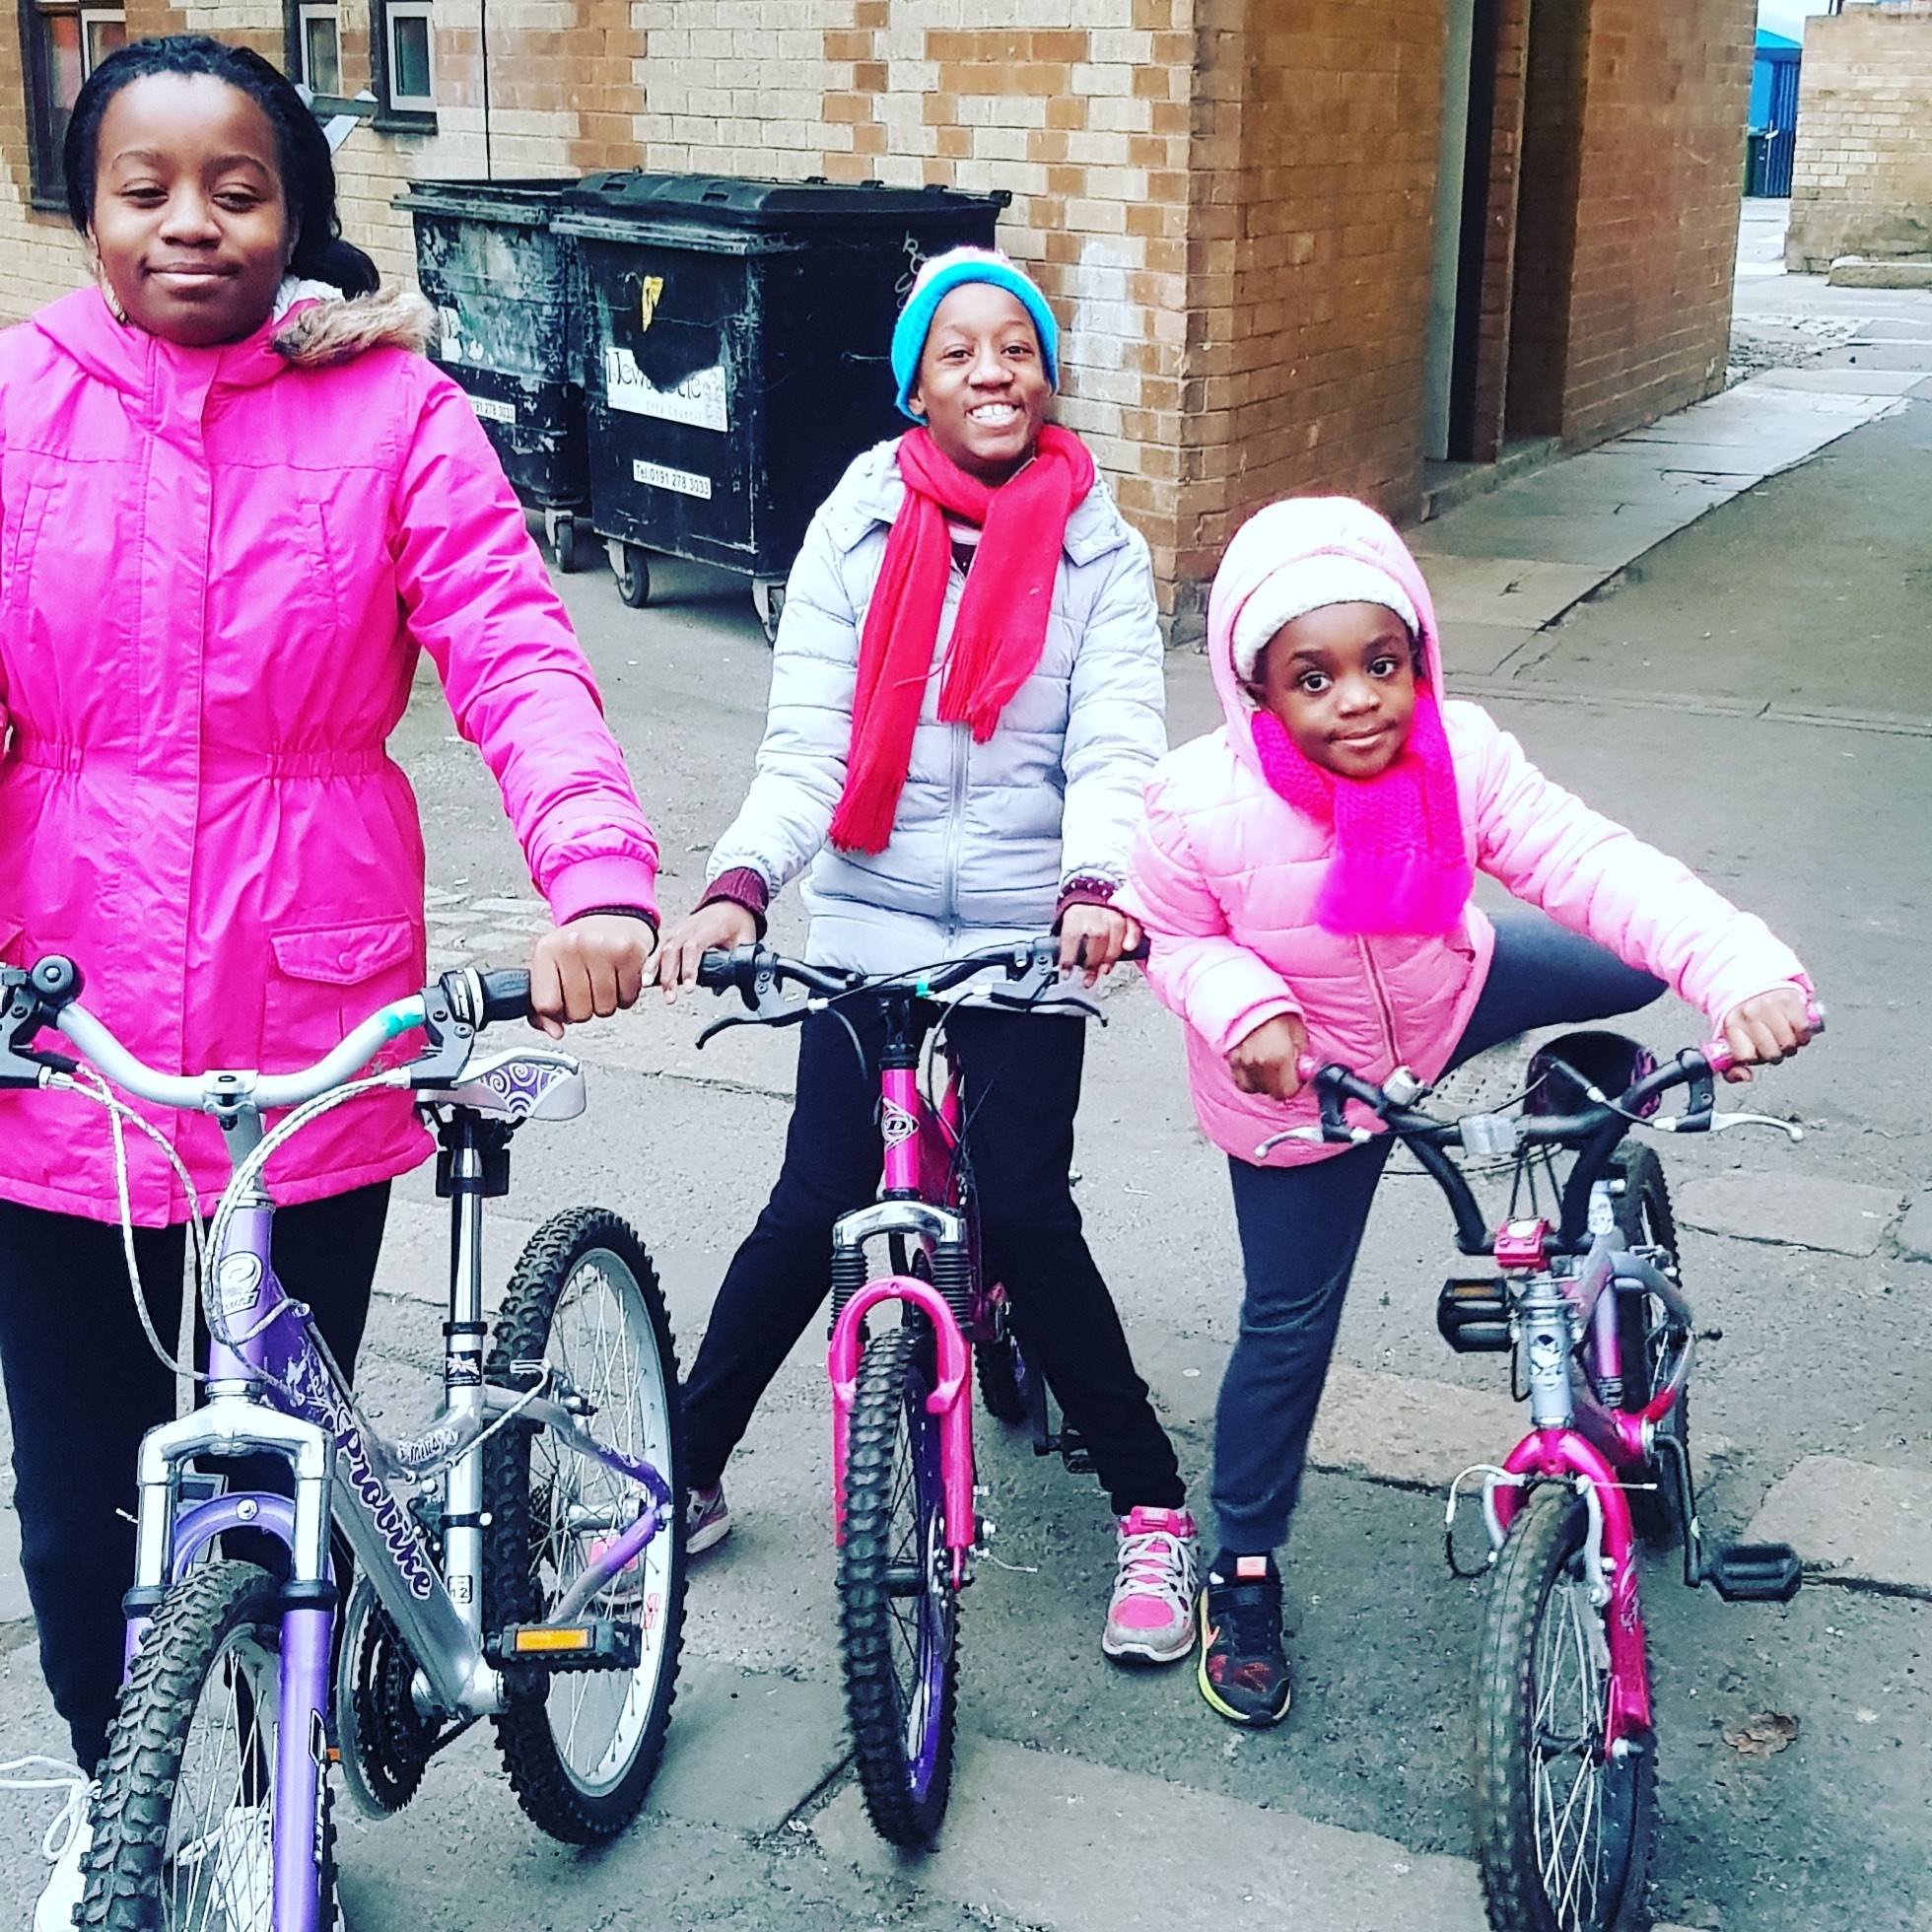 Three young girls with their community bikes